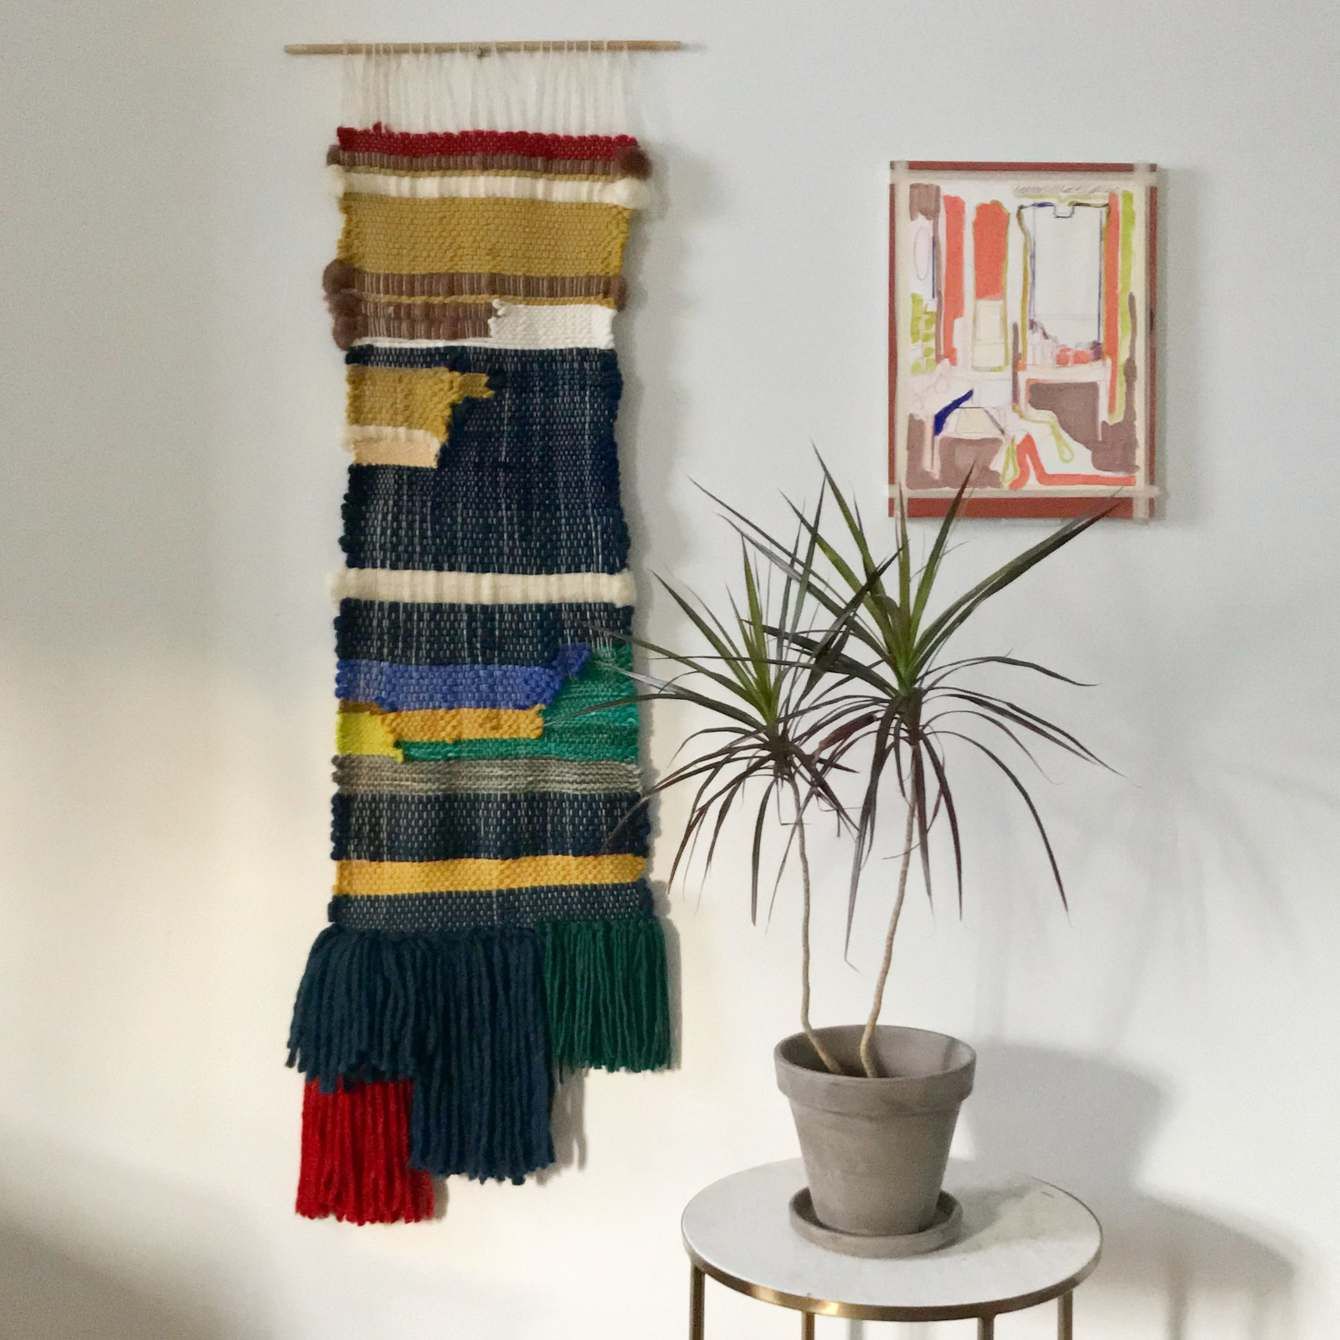 How To Get Started With Tapestry Weaving - The Woolery